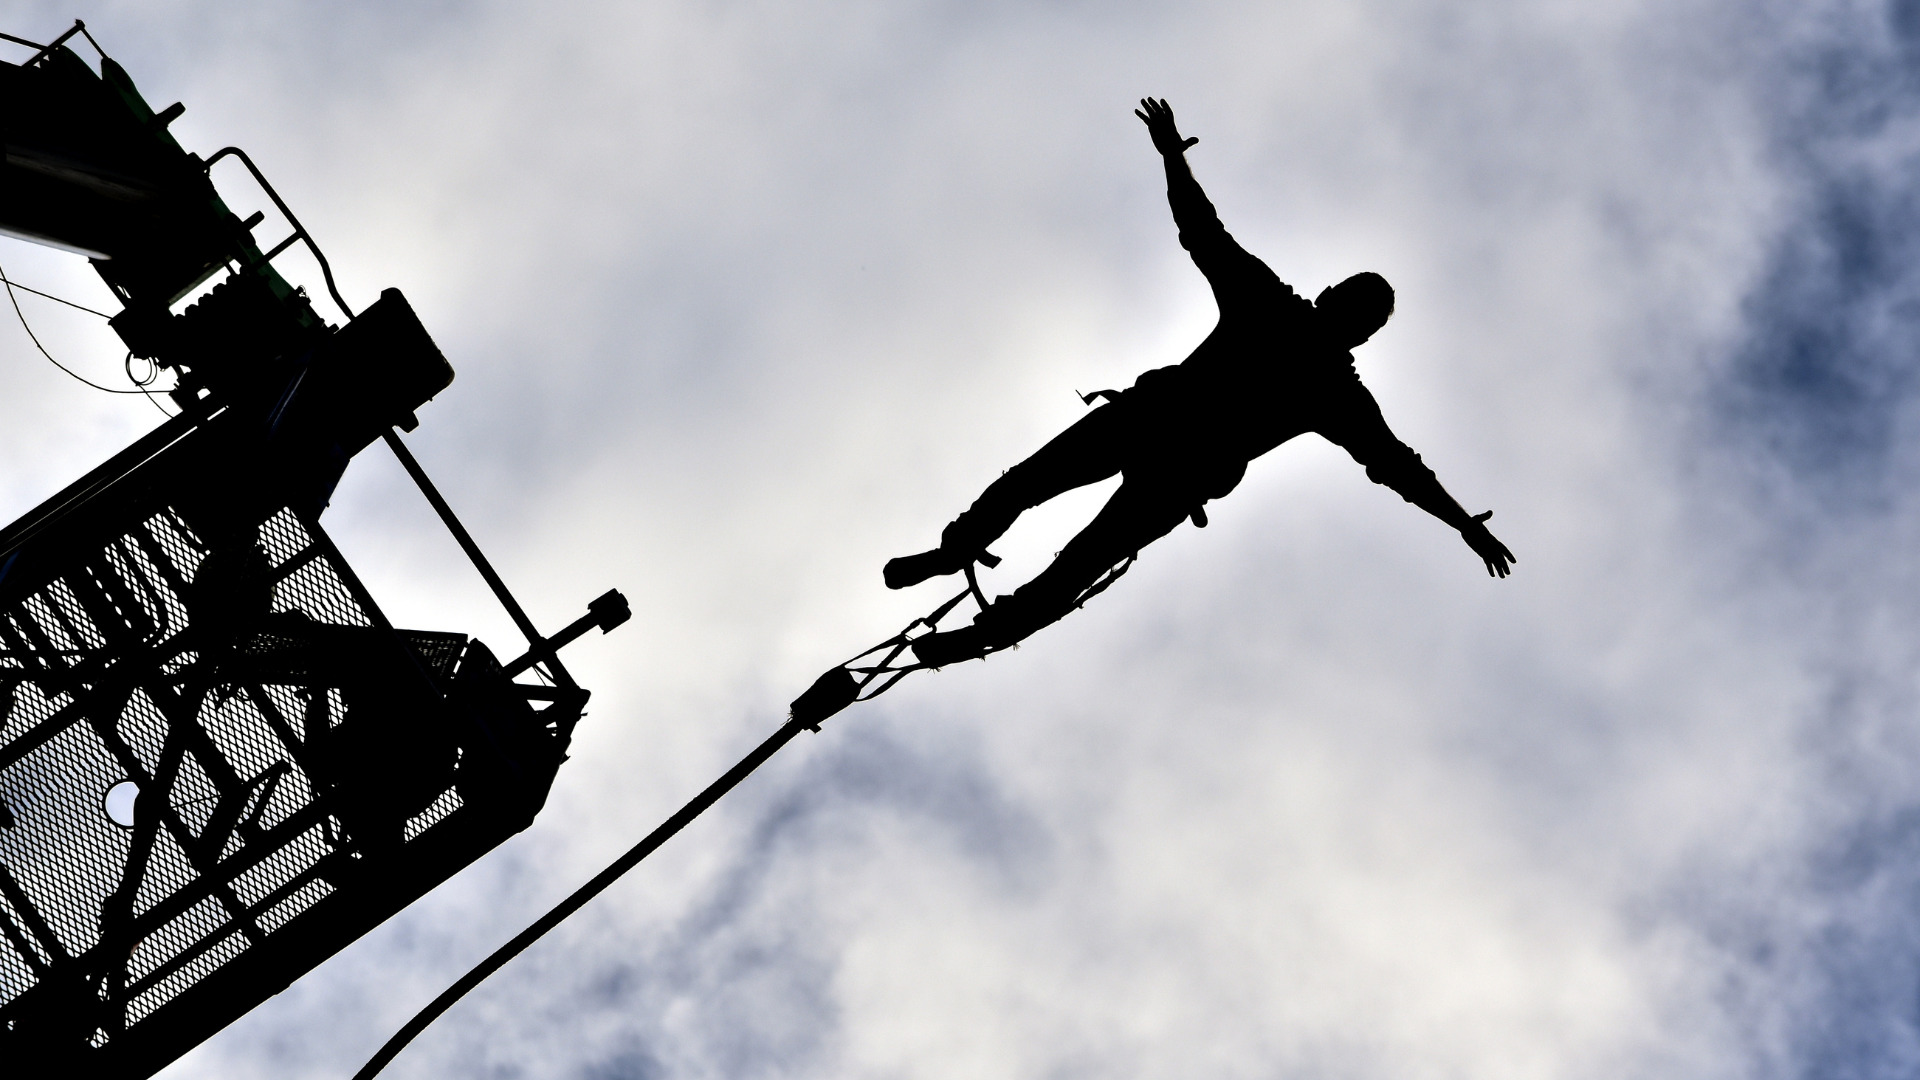 bungee jumping risks and bungee jumping risk mitigation tips